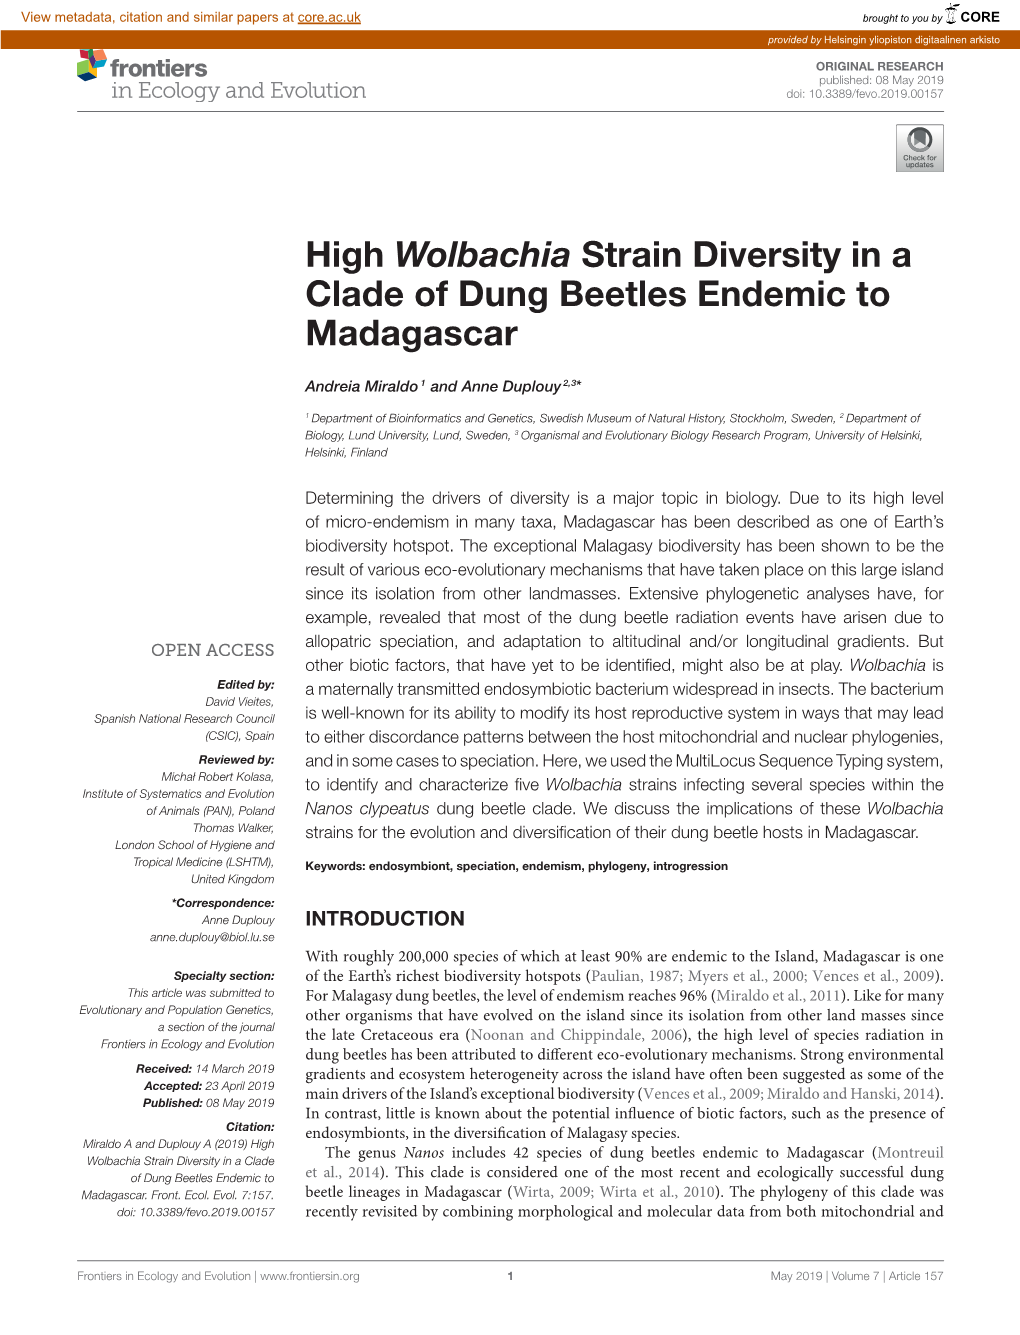 High Wolbachia Strain Diversity in a Clade of Dung Beetles Endemic to Madagascar